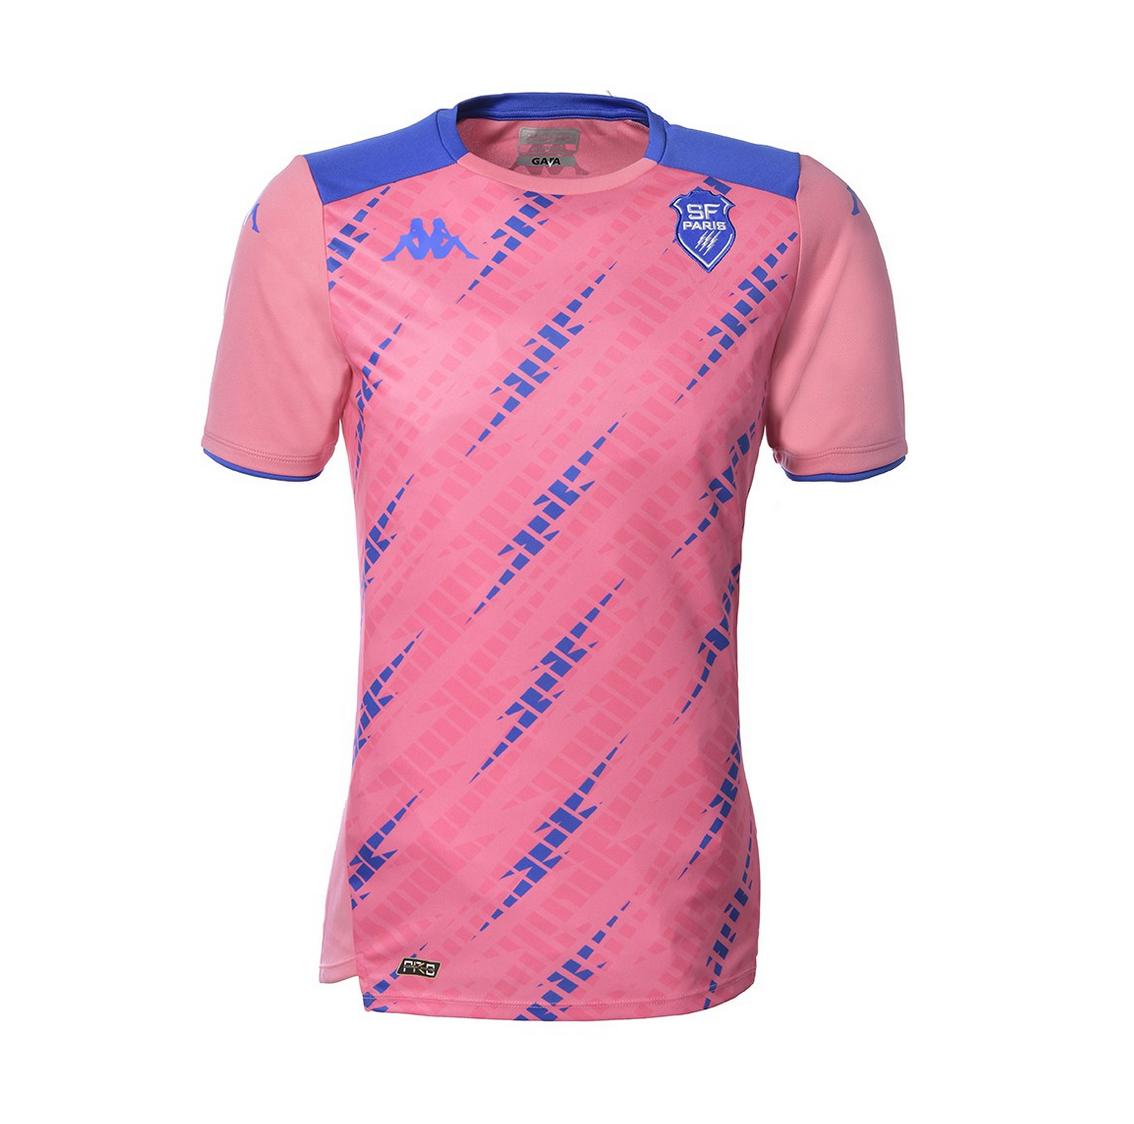 8 Pretty in pink ideas  stade francais, pretty in pink, rugby